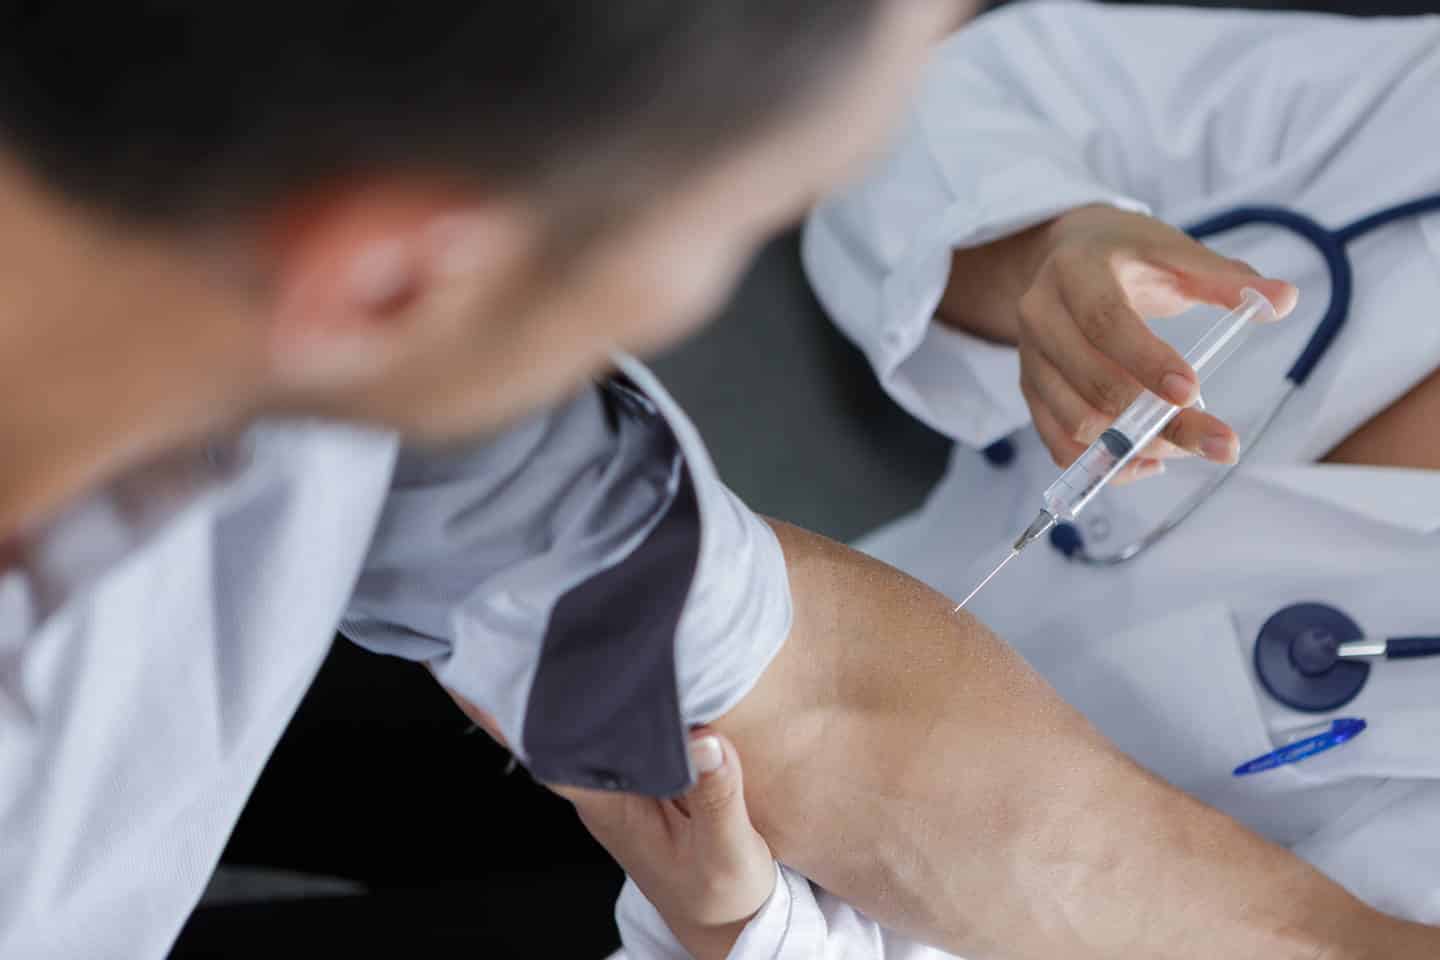 doctor injection flu vaccine to patients arm p49v6rl1 1